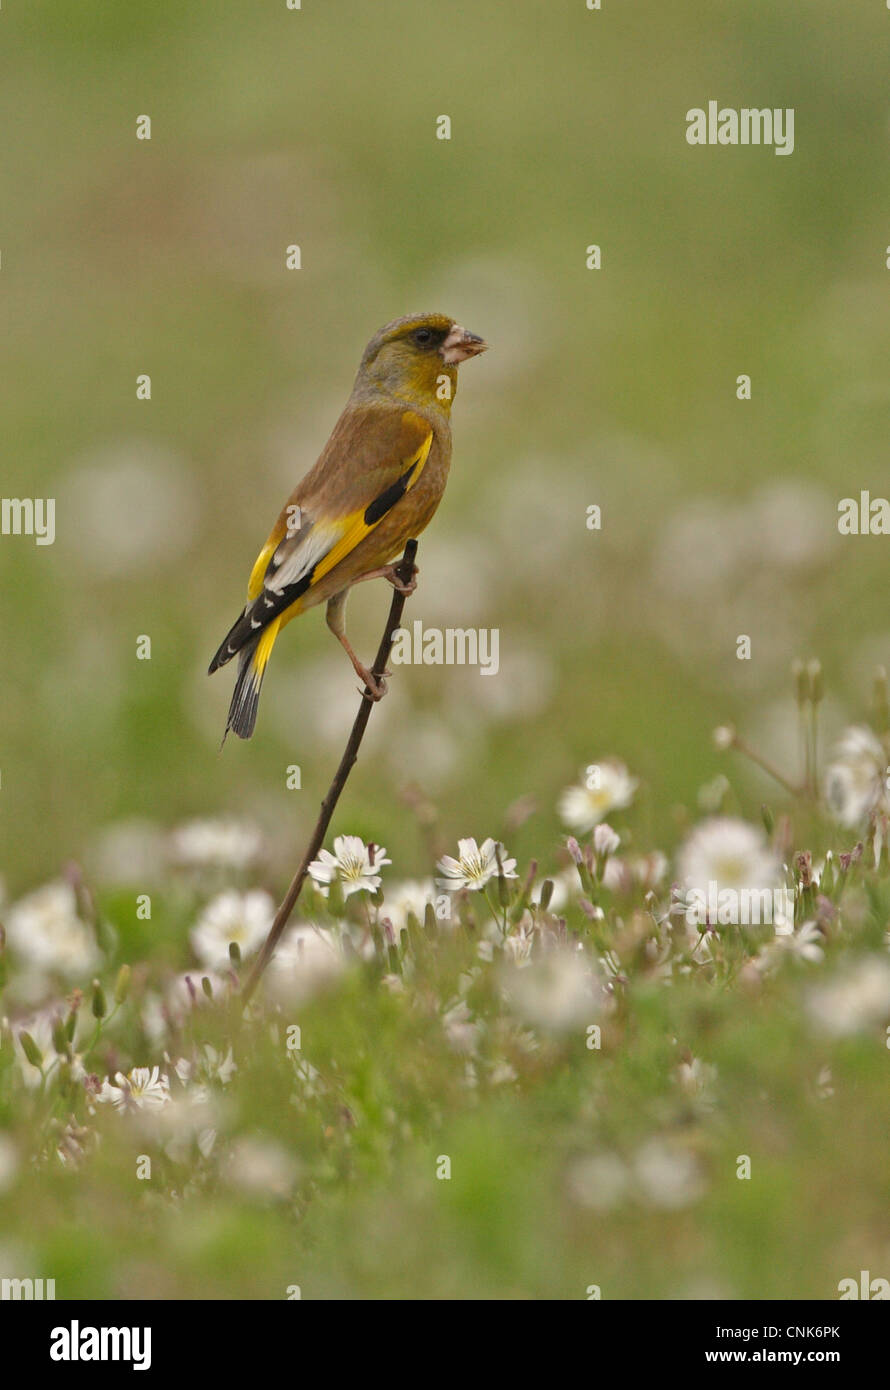 Oriental Greenfinch (Carduelis sinica ussuriensis) adult male, perched on stick amongst flowers, Beidaihe, Hebei, China, may Stock Photo